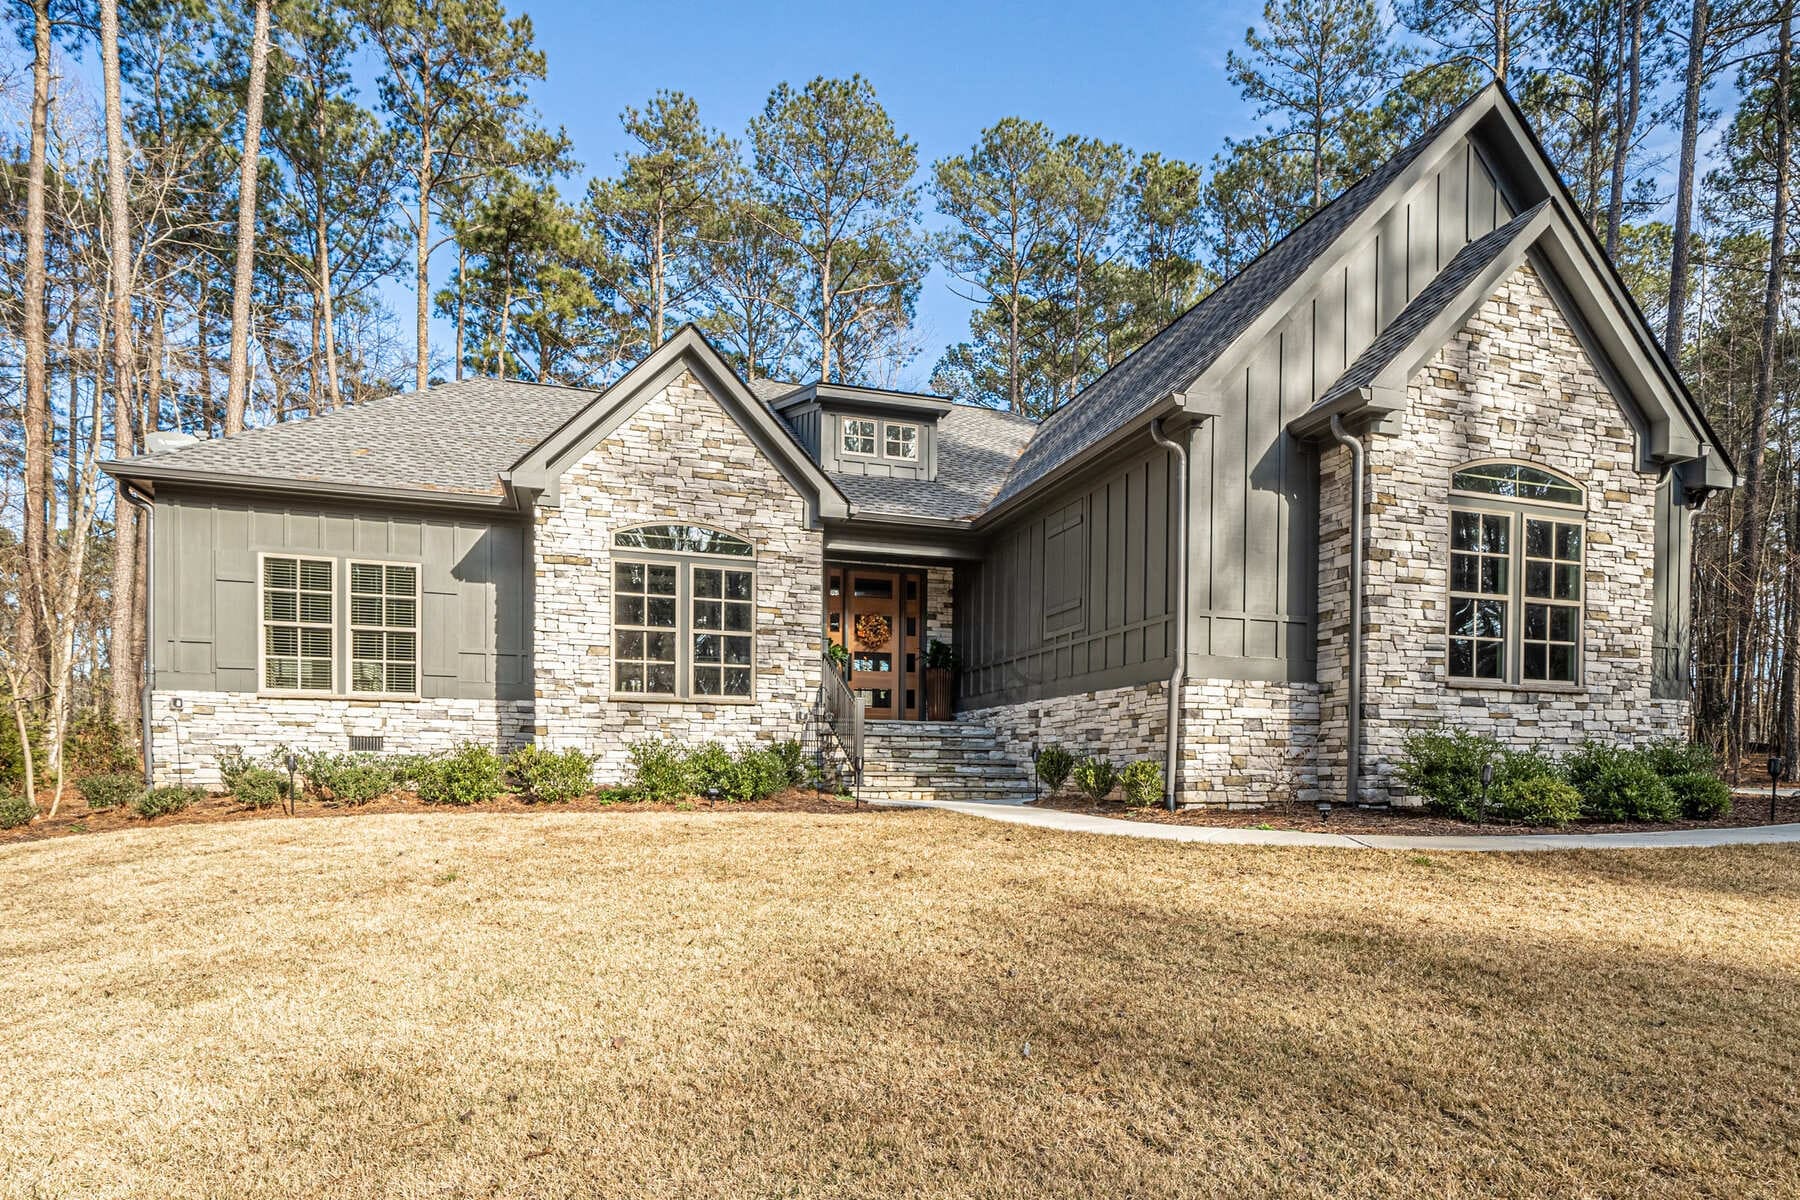 Gorgeous View of Front of House with Paneling and Stone Work |PAXISgroup